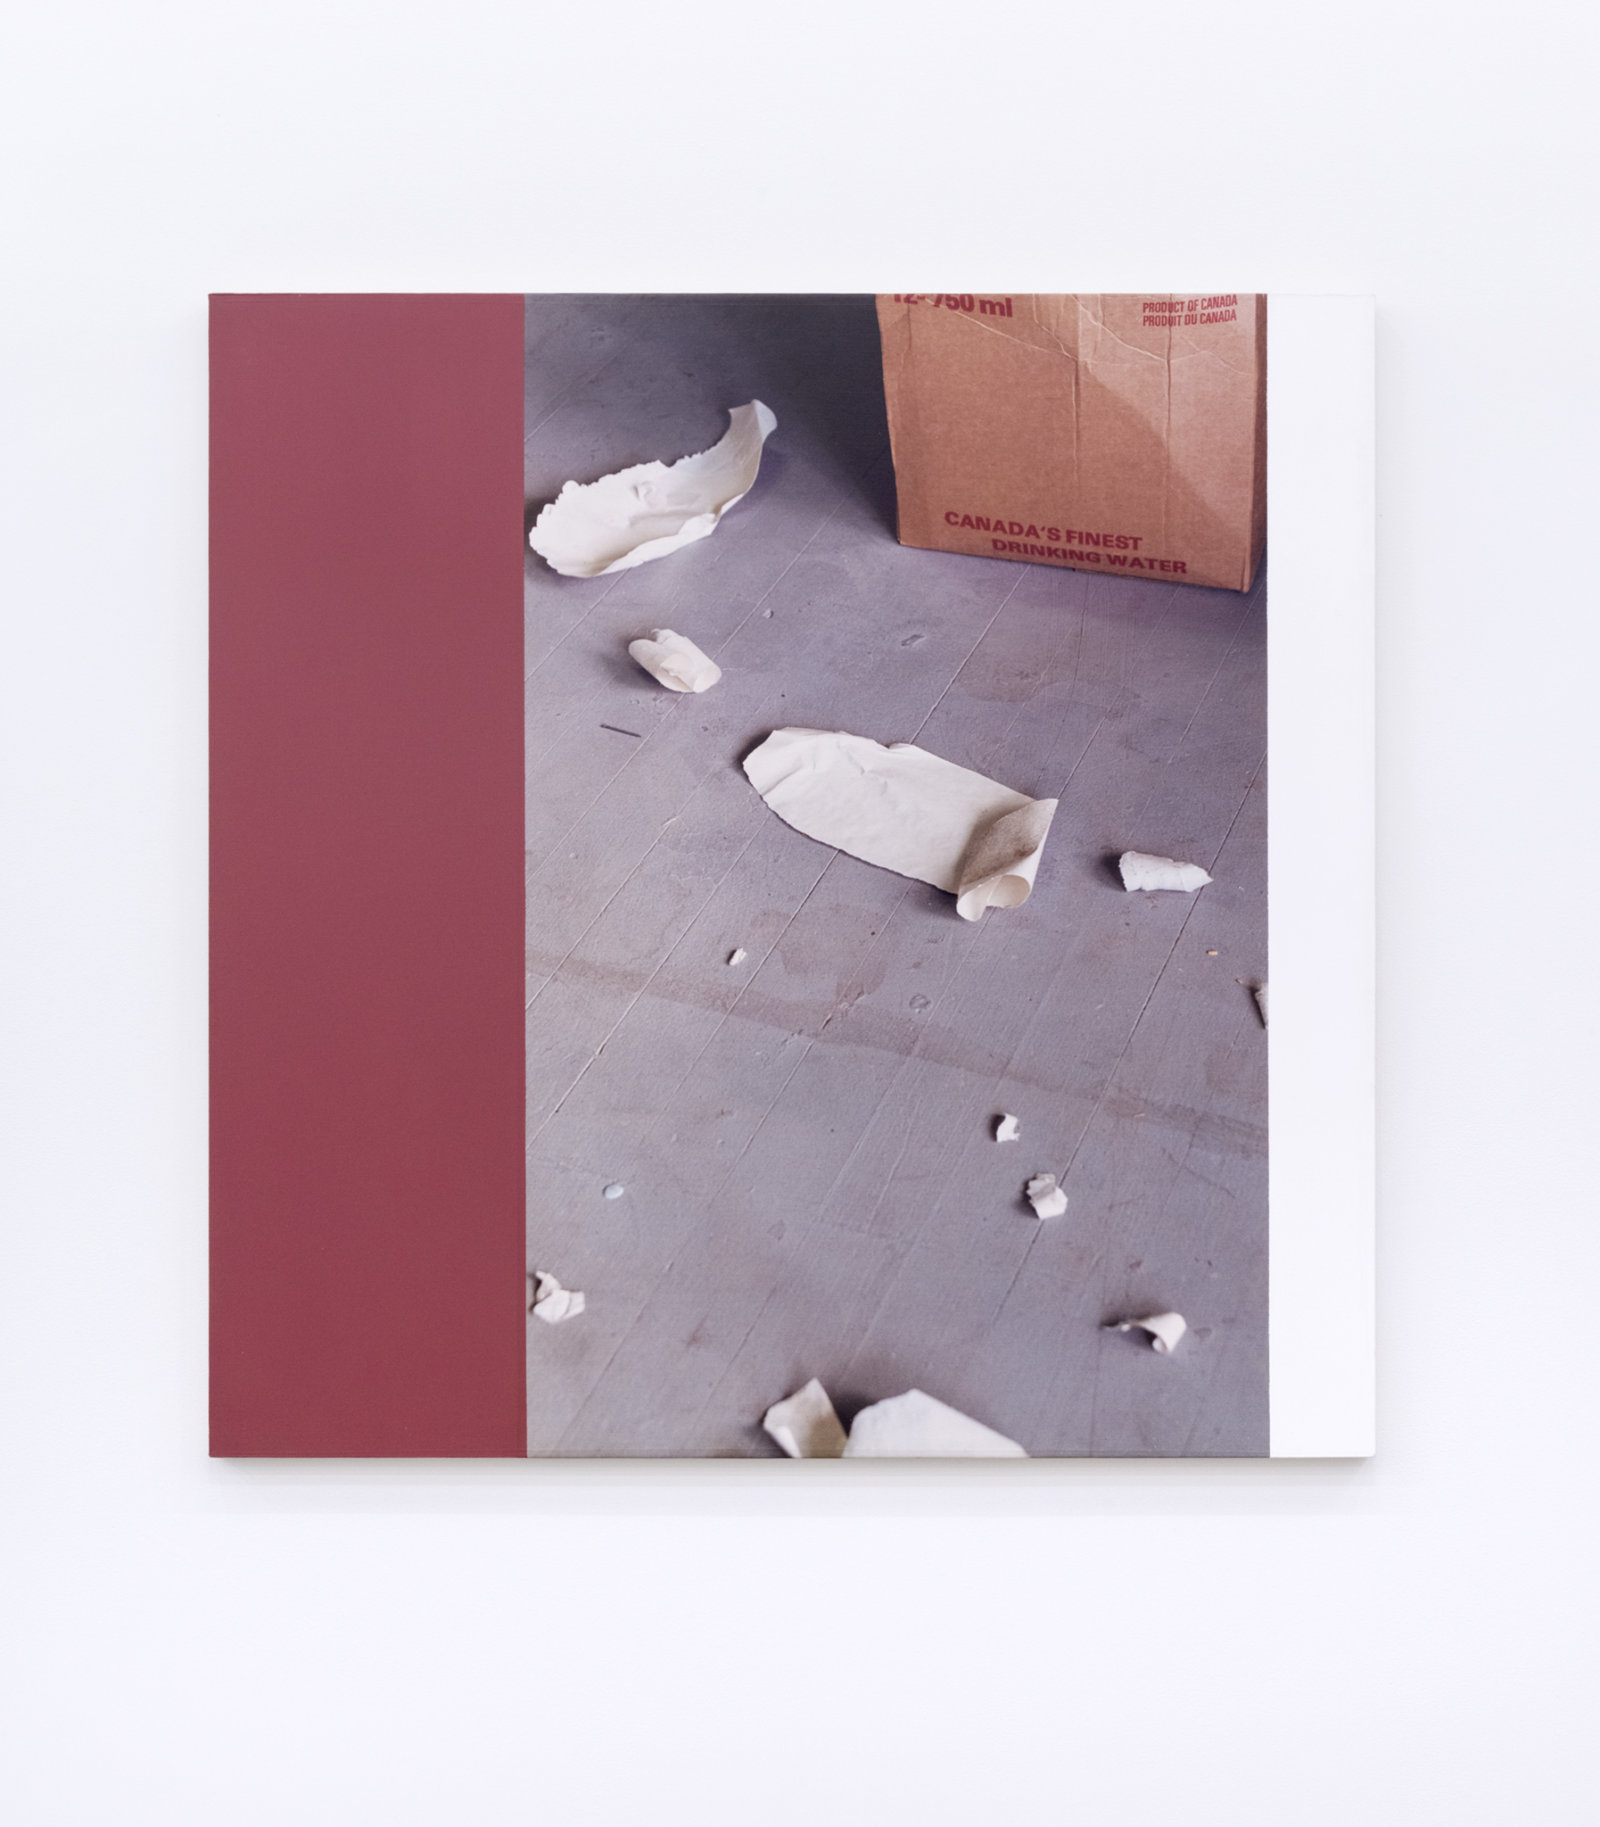 Ian Wallace, Messes from the floor of the studio of Elspeth Pratt VI, 1989, photolaminate and acrylic on canvas, 48 x 48 in. (122 x 122 cm)